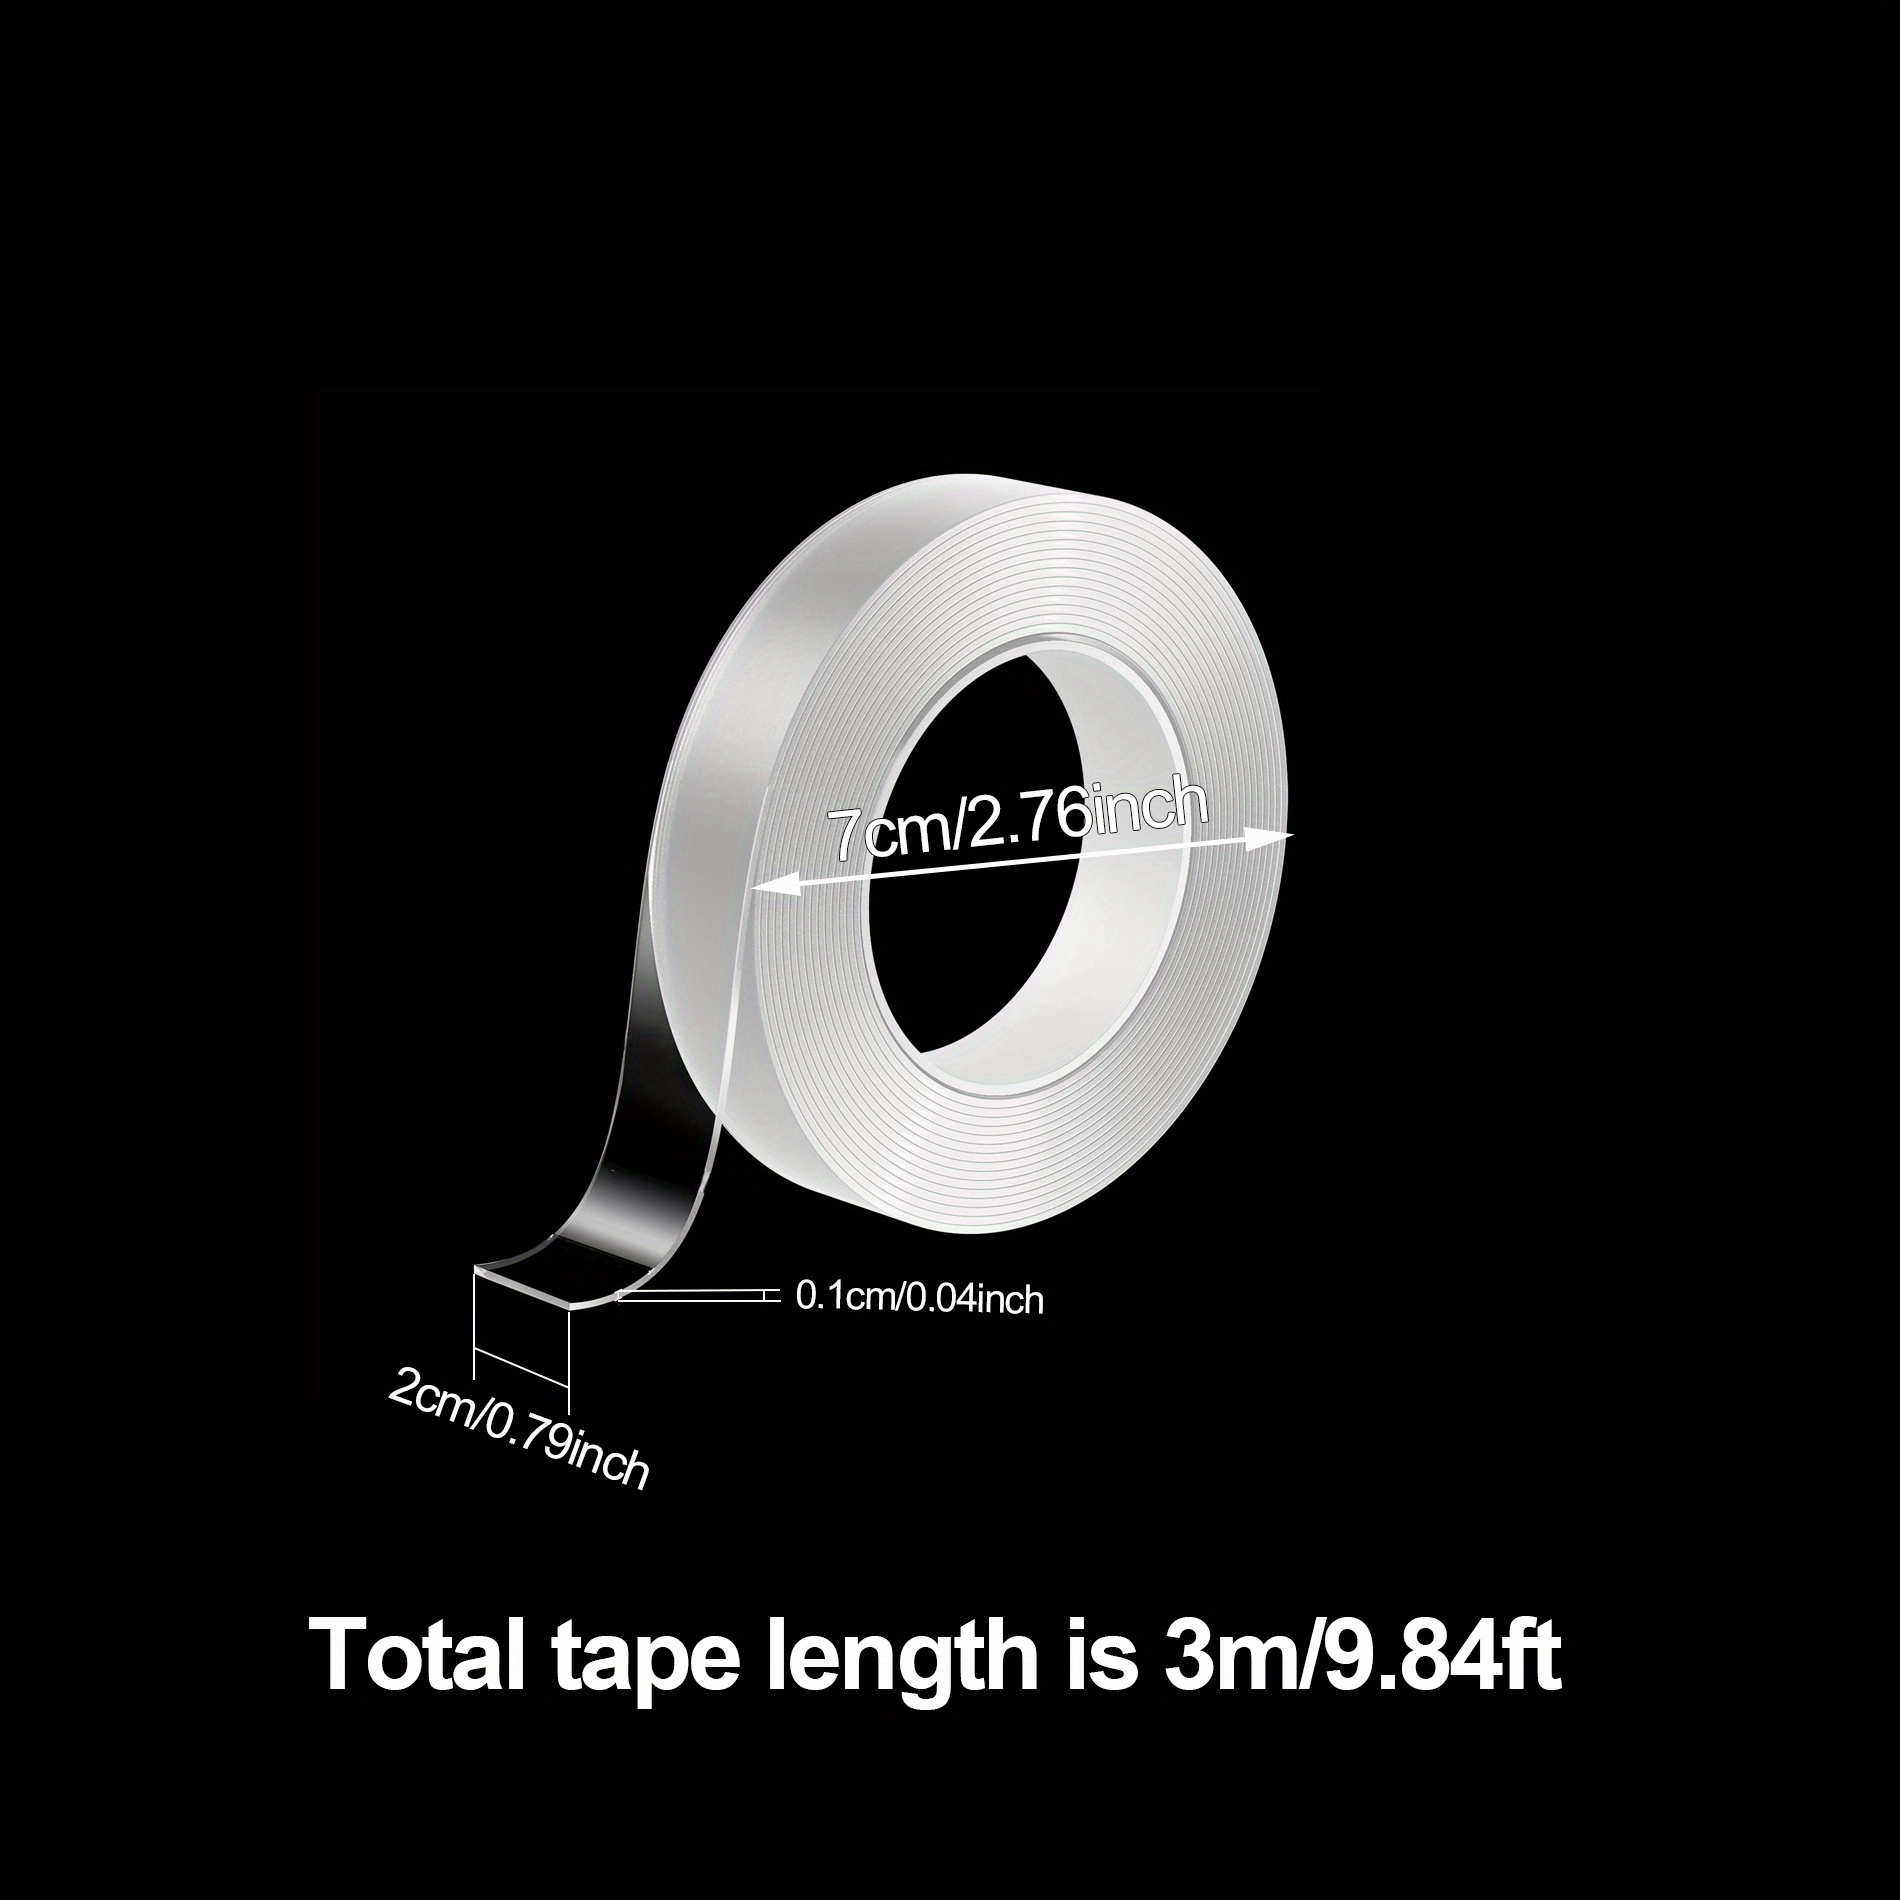 OOK 1 x 72-inch Picture Mount Double Sided Tape - 1pc